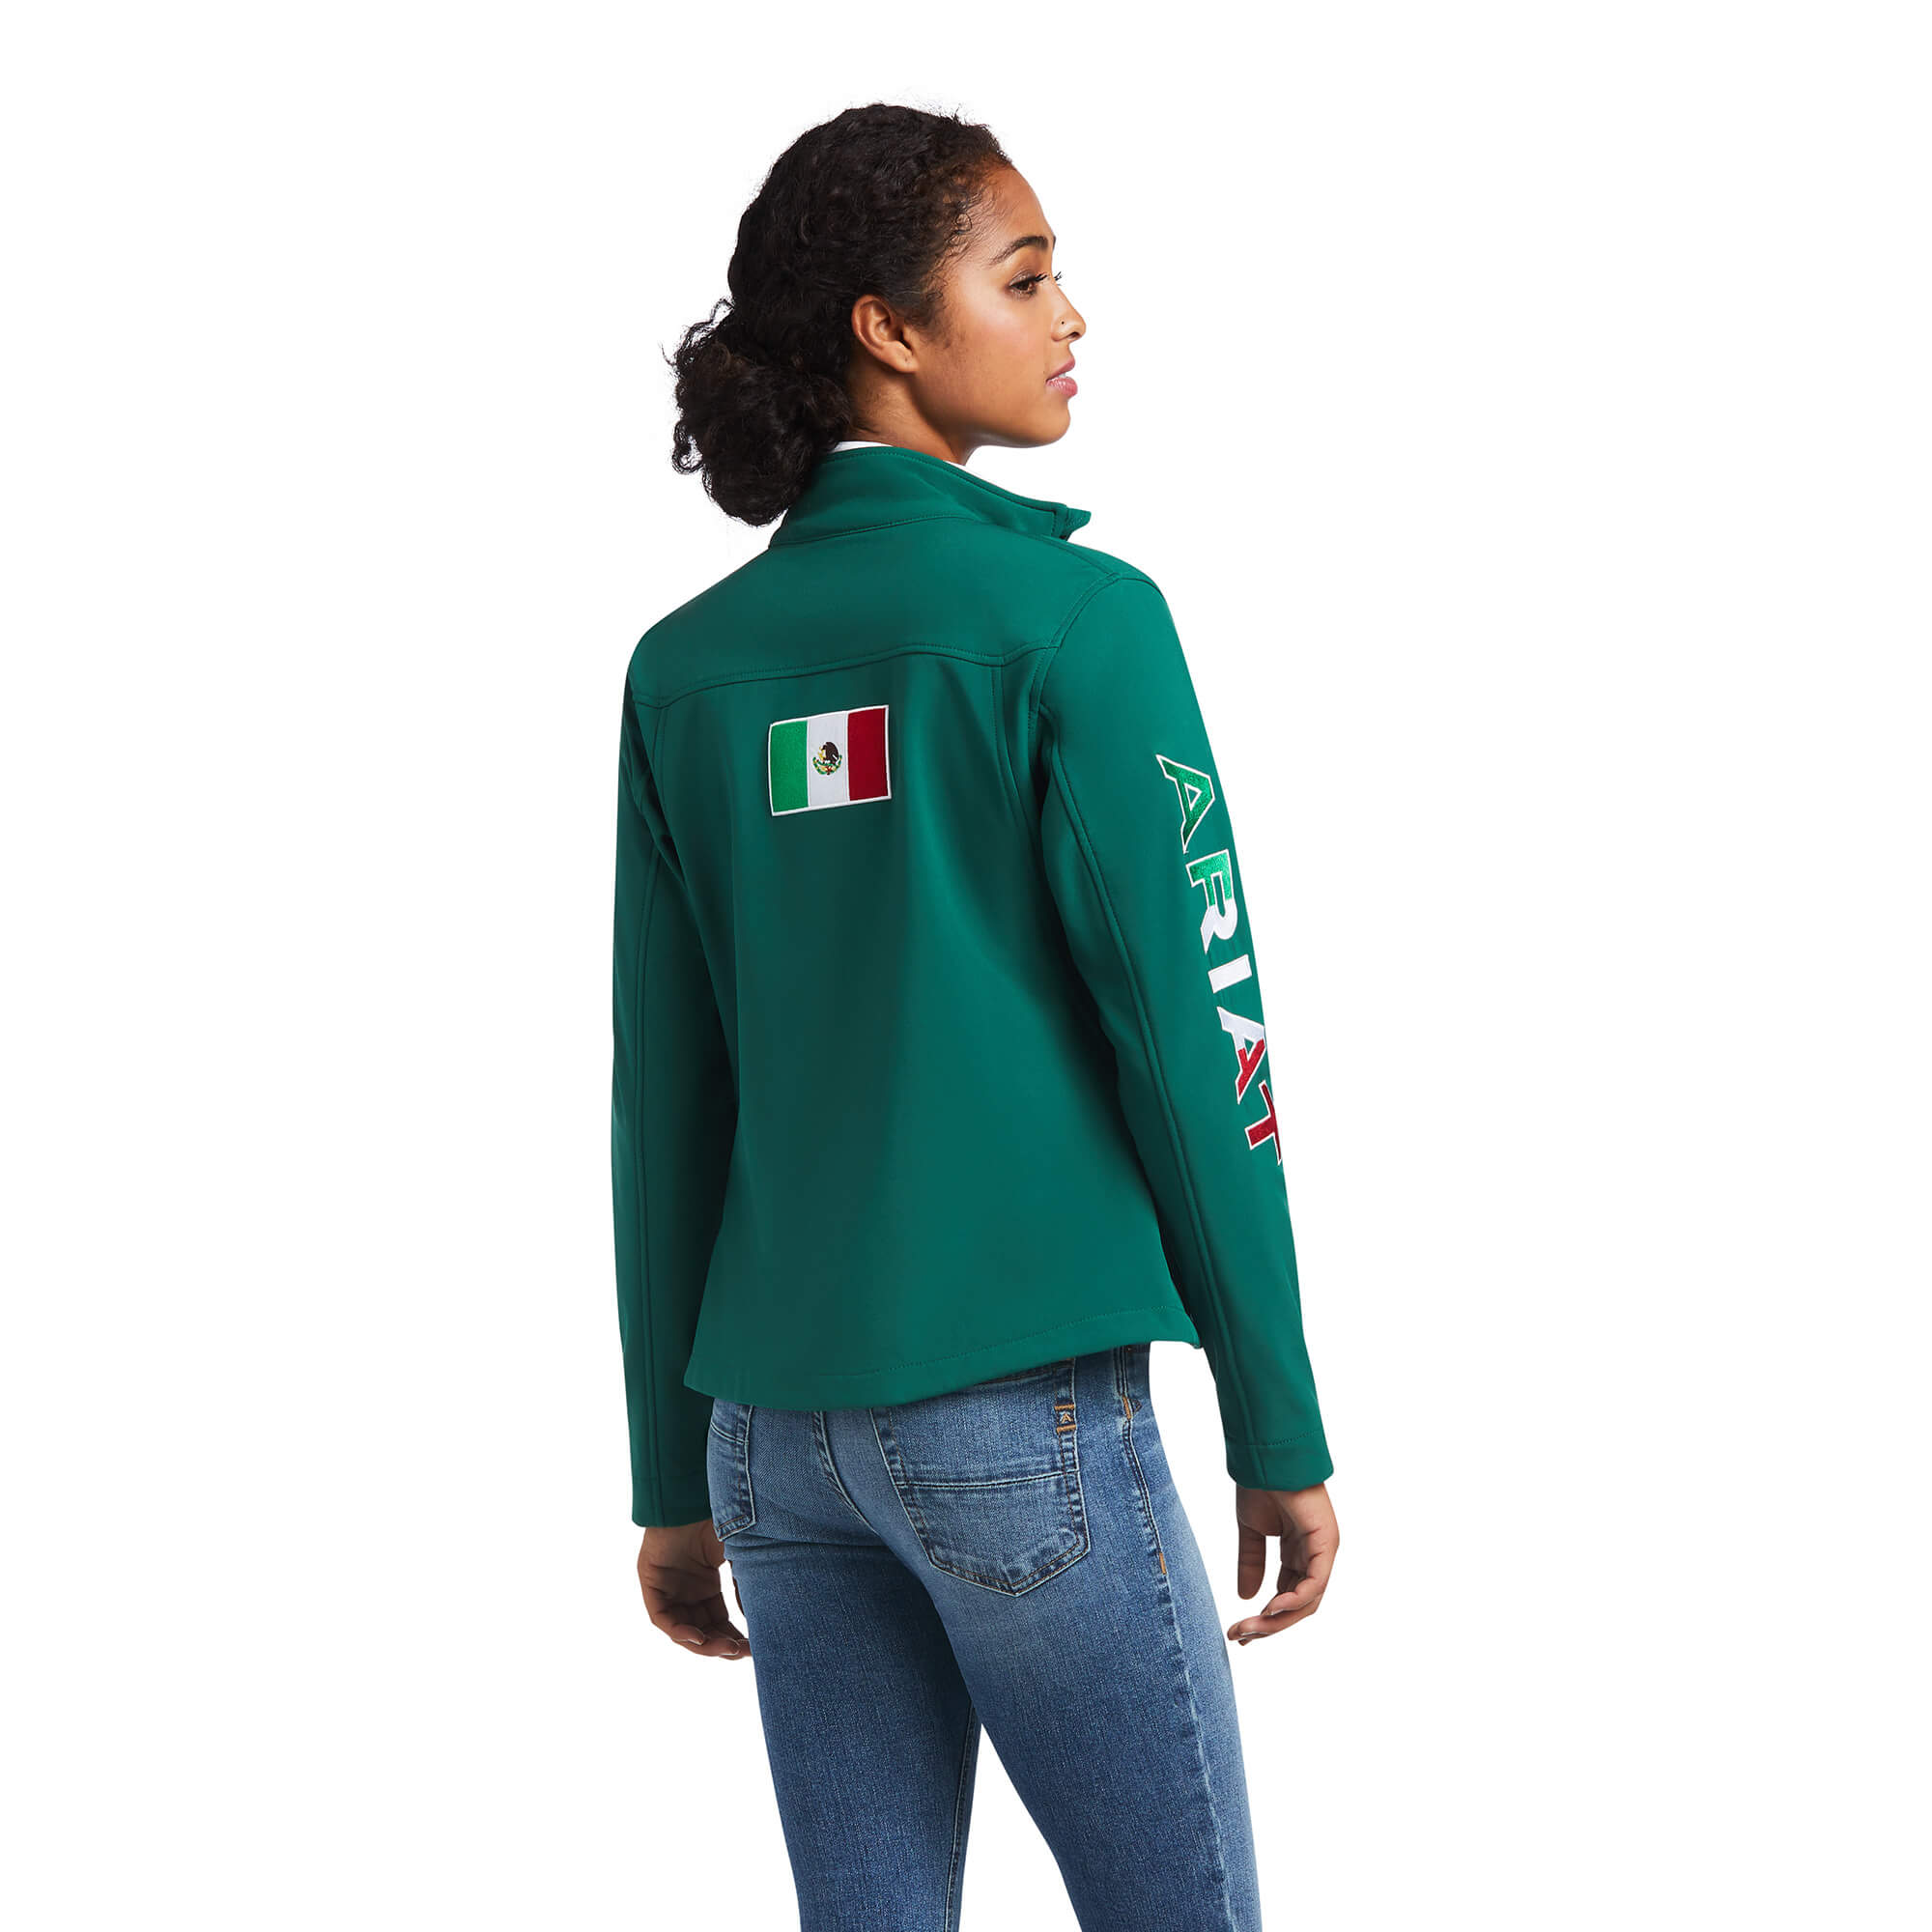 Back of Women's Green Ariat Jacket Mexico Flag